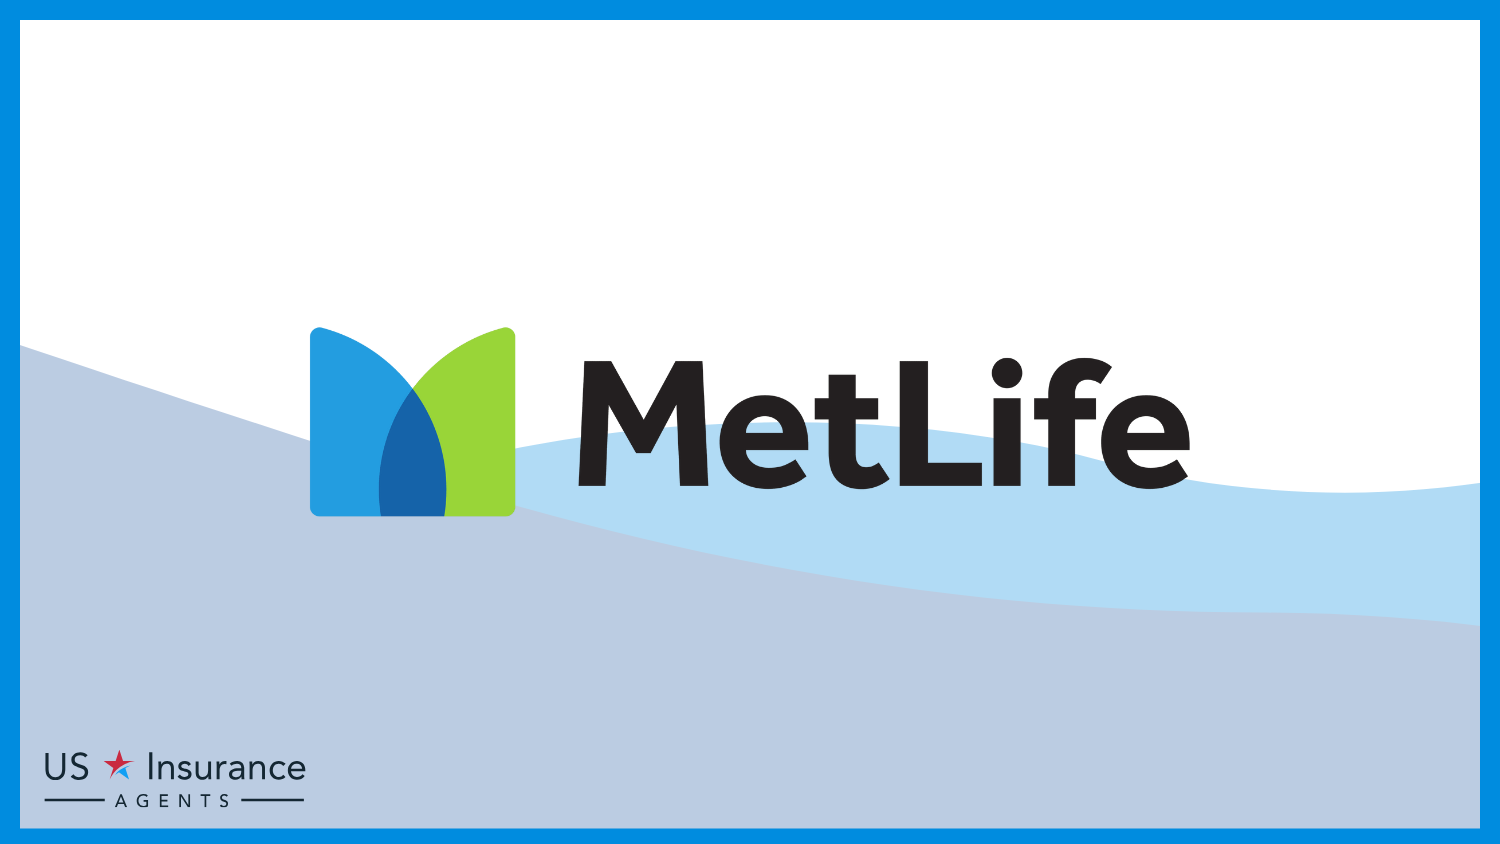 MetLife: Best Life Insurance for People With Down Syndrome